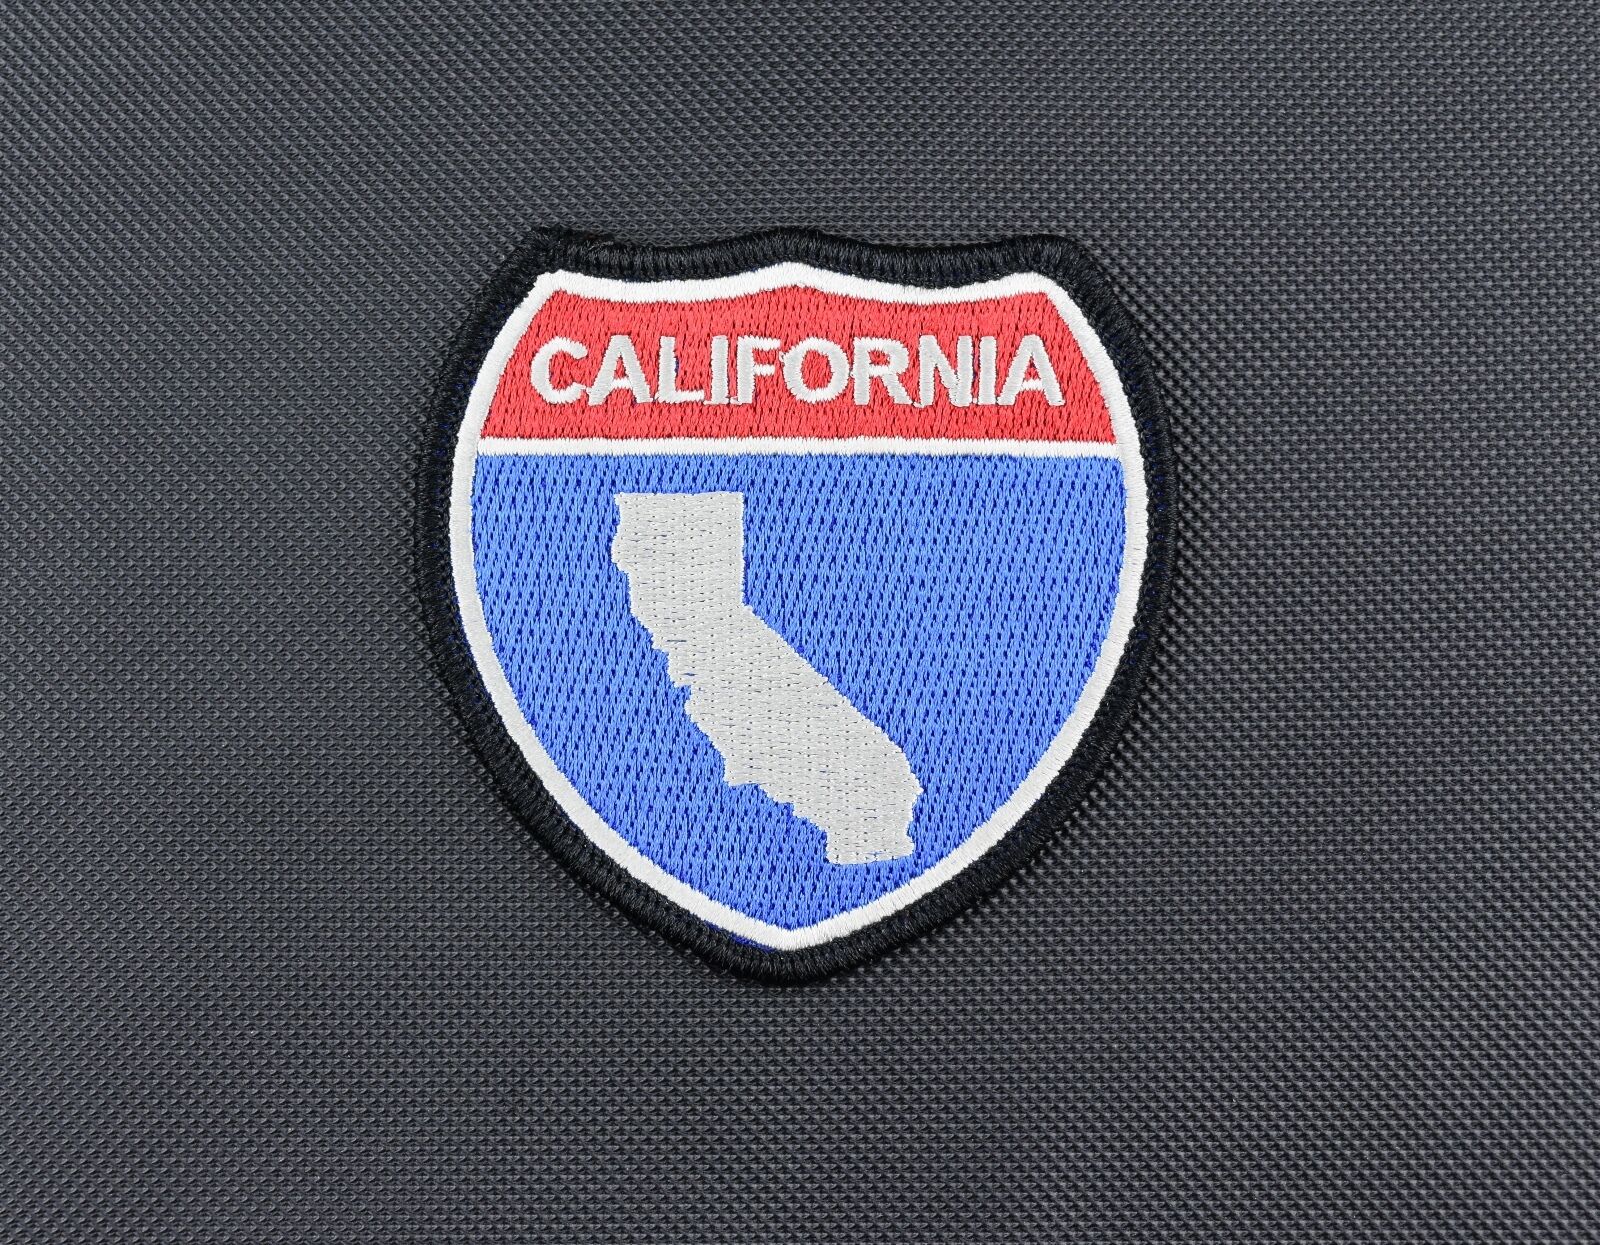 California Interstate Sign Morale Patch Cali CA Freeway Highway CHP Iron On